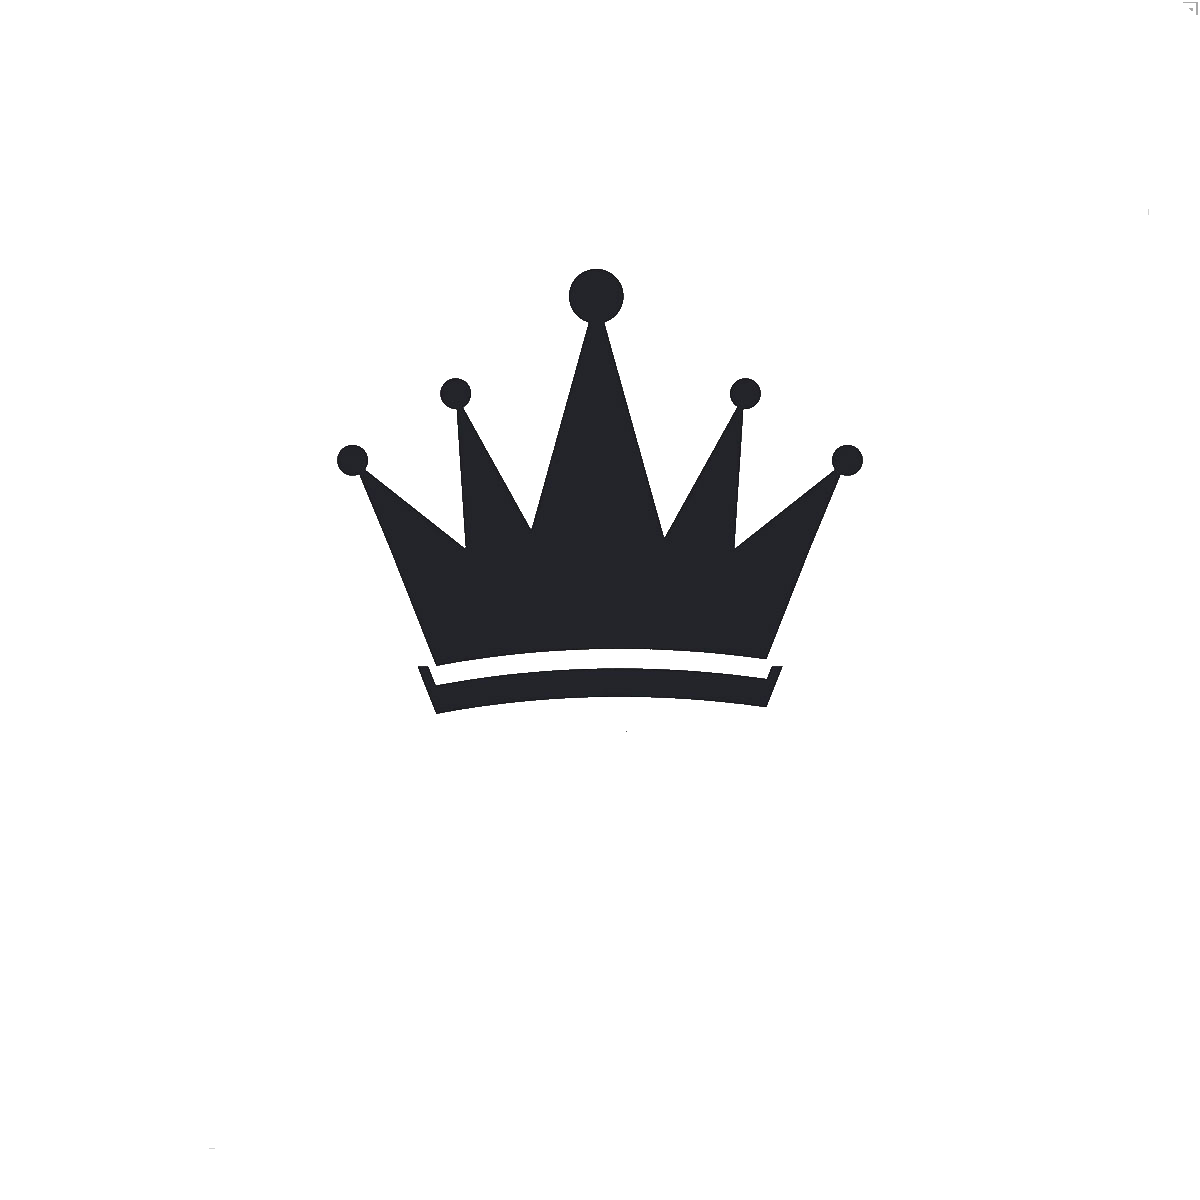 crown silhouette png
